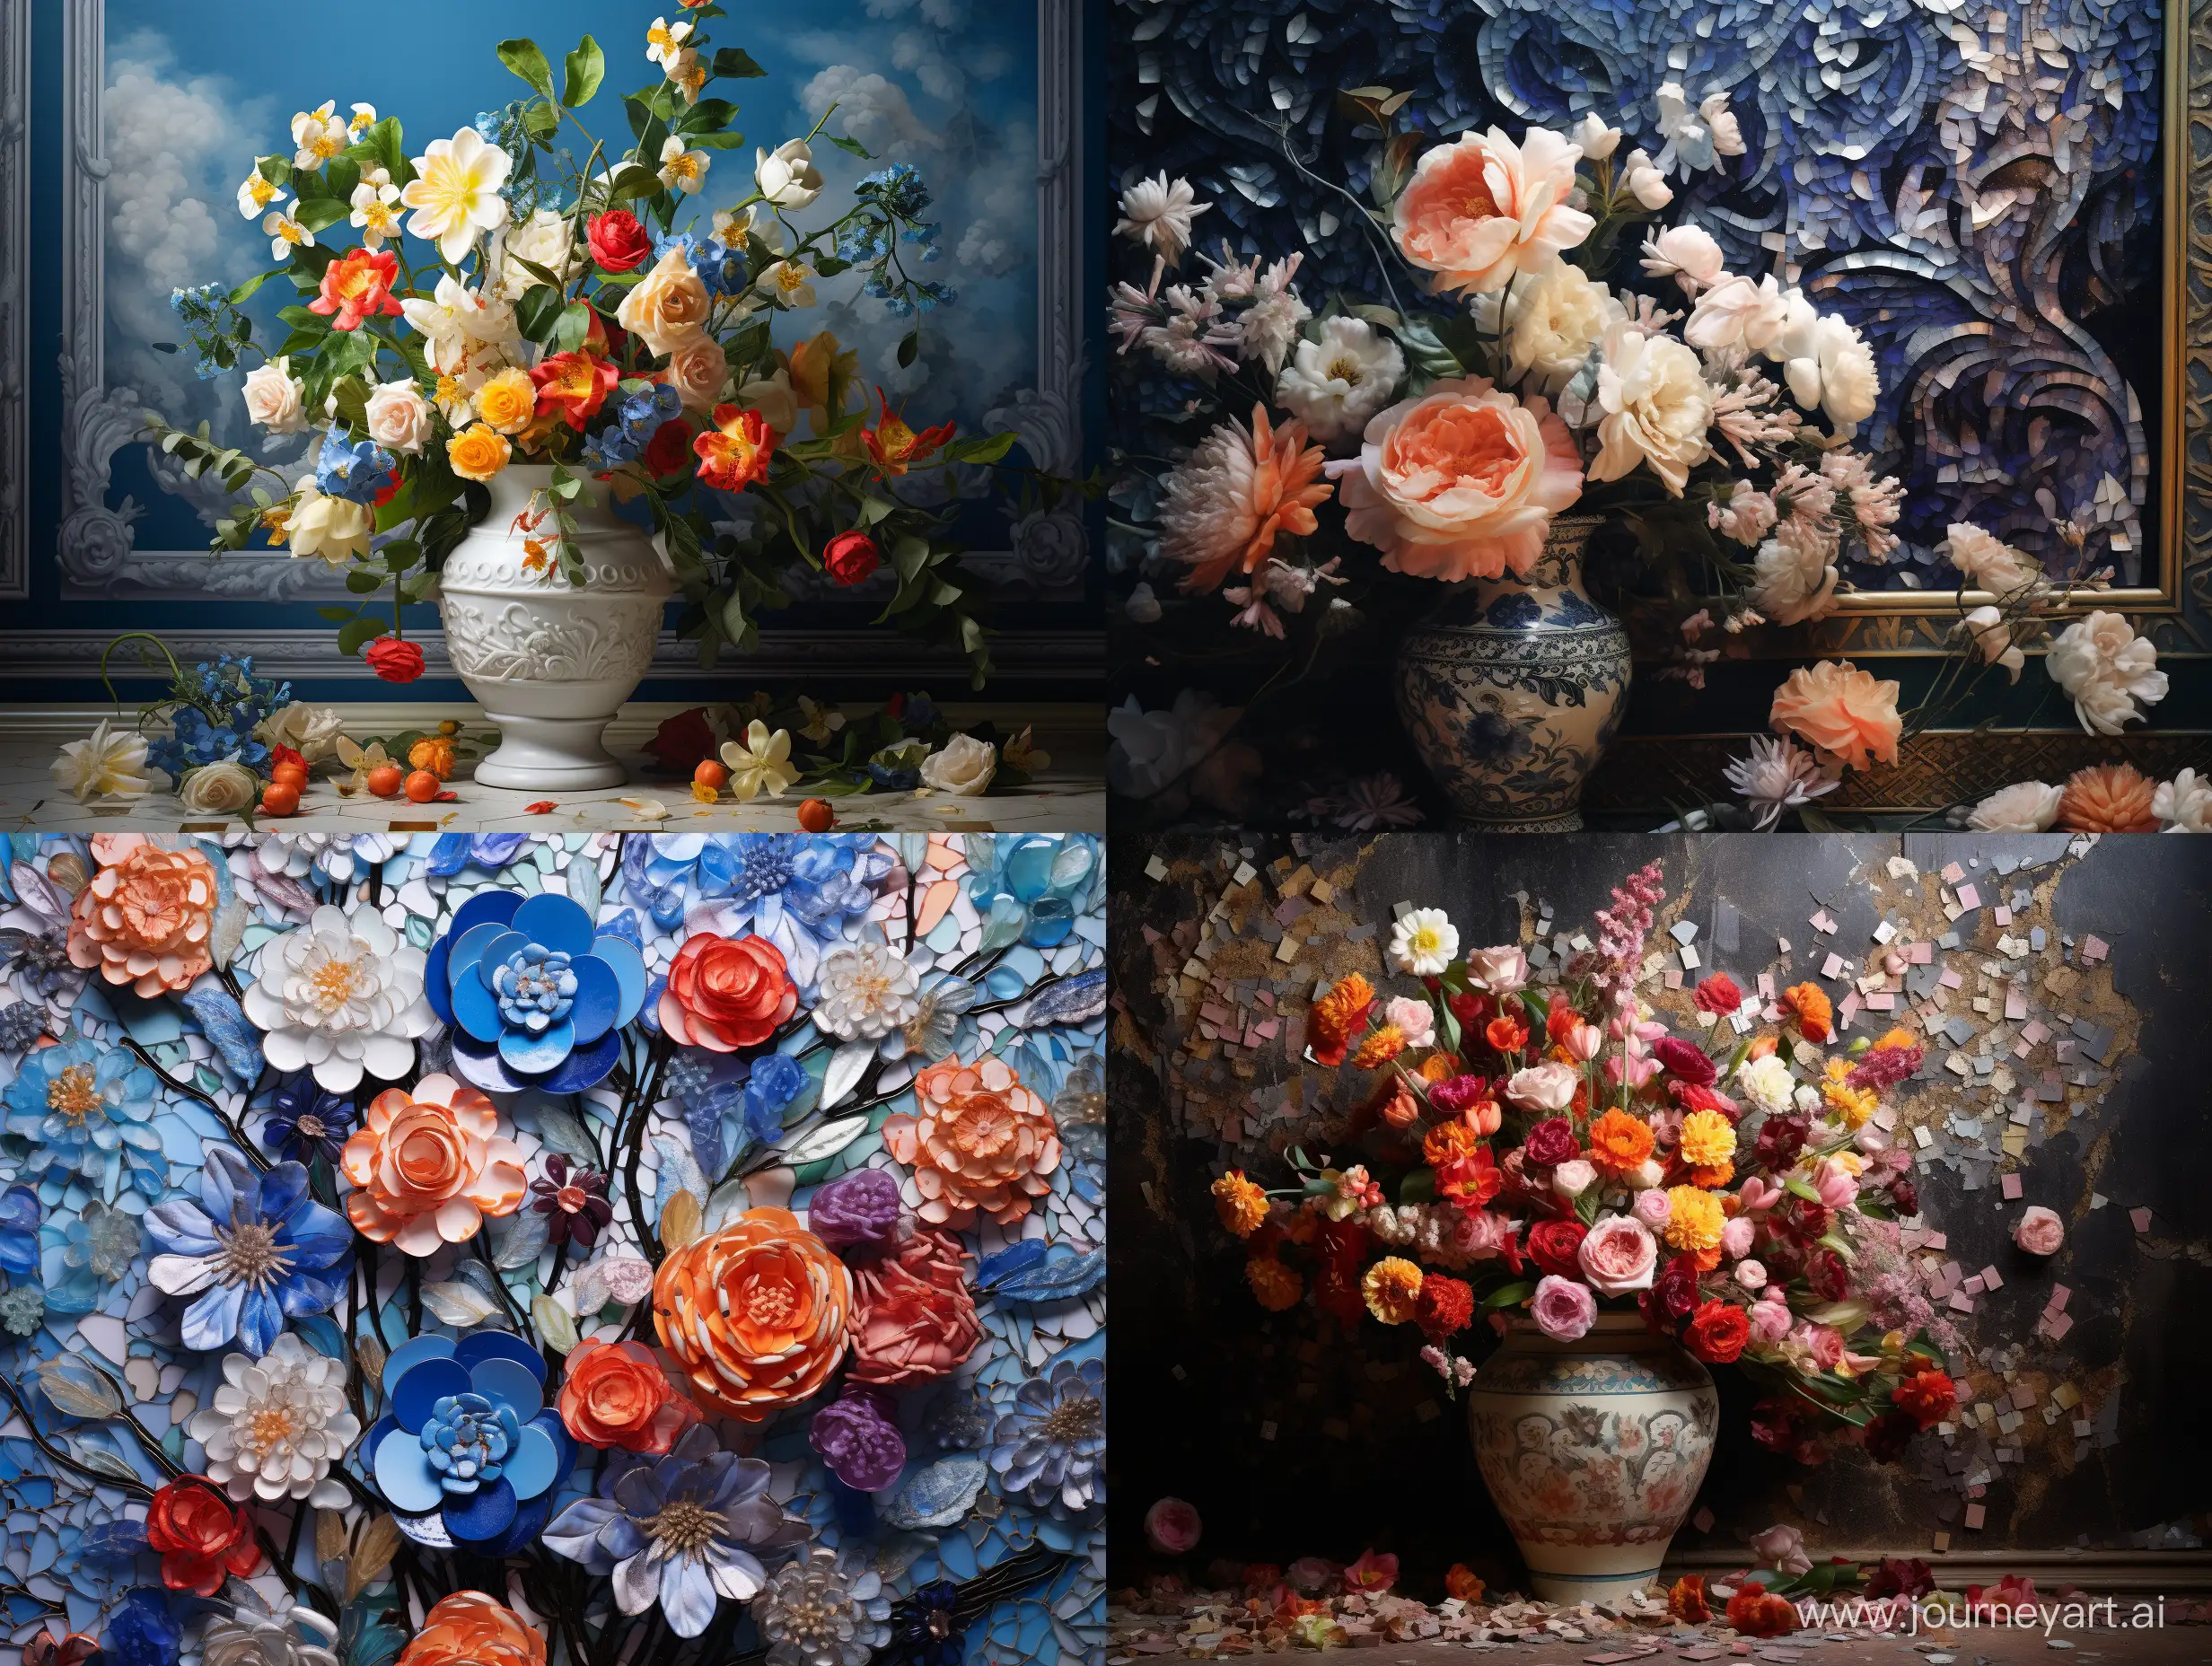 Floral-Mosaic-Interior-Photography-Captivating-Flower-Images-in-43-Aspect-Ratio